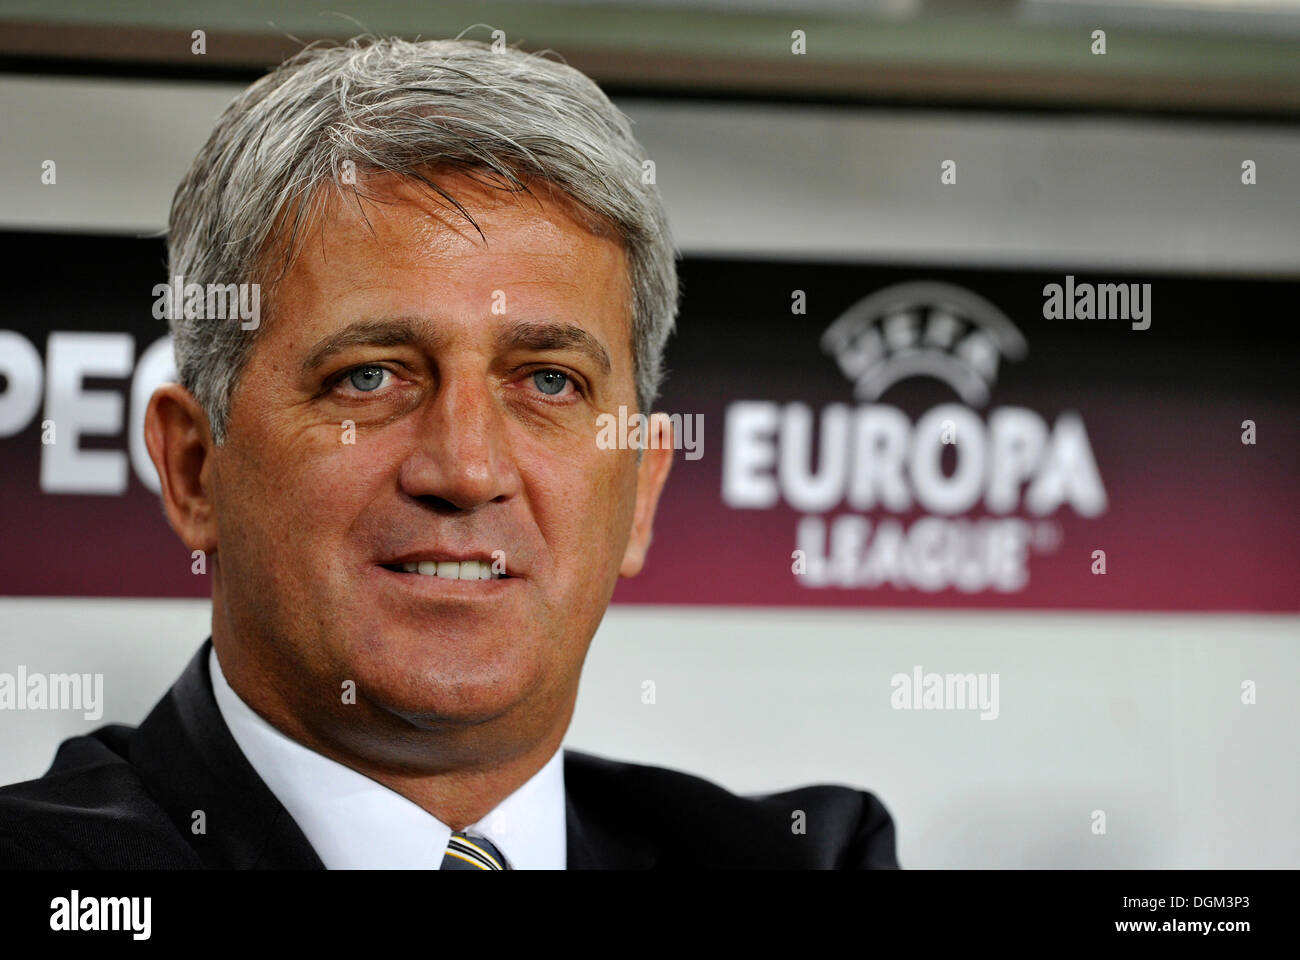 Vladimir Petkovic, Coach of BSC Young Boys Bern, in front of the logo of the UEFA Europa League, Mercedes-Benz Arena, Stuttgart Stock Photo